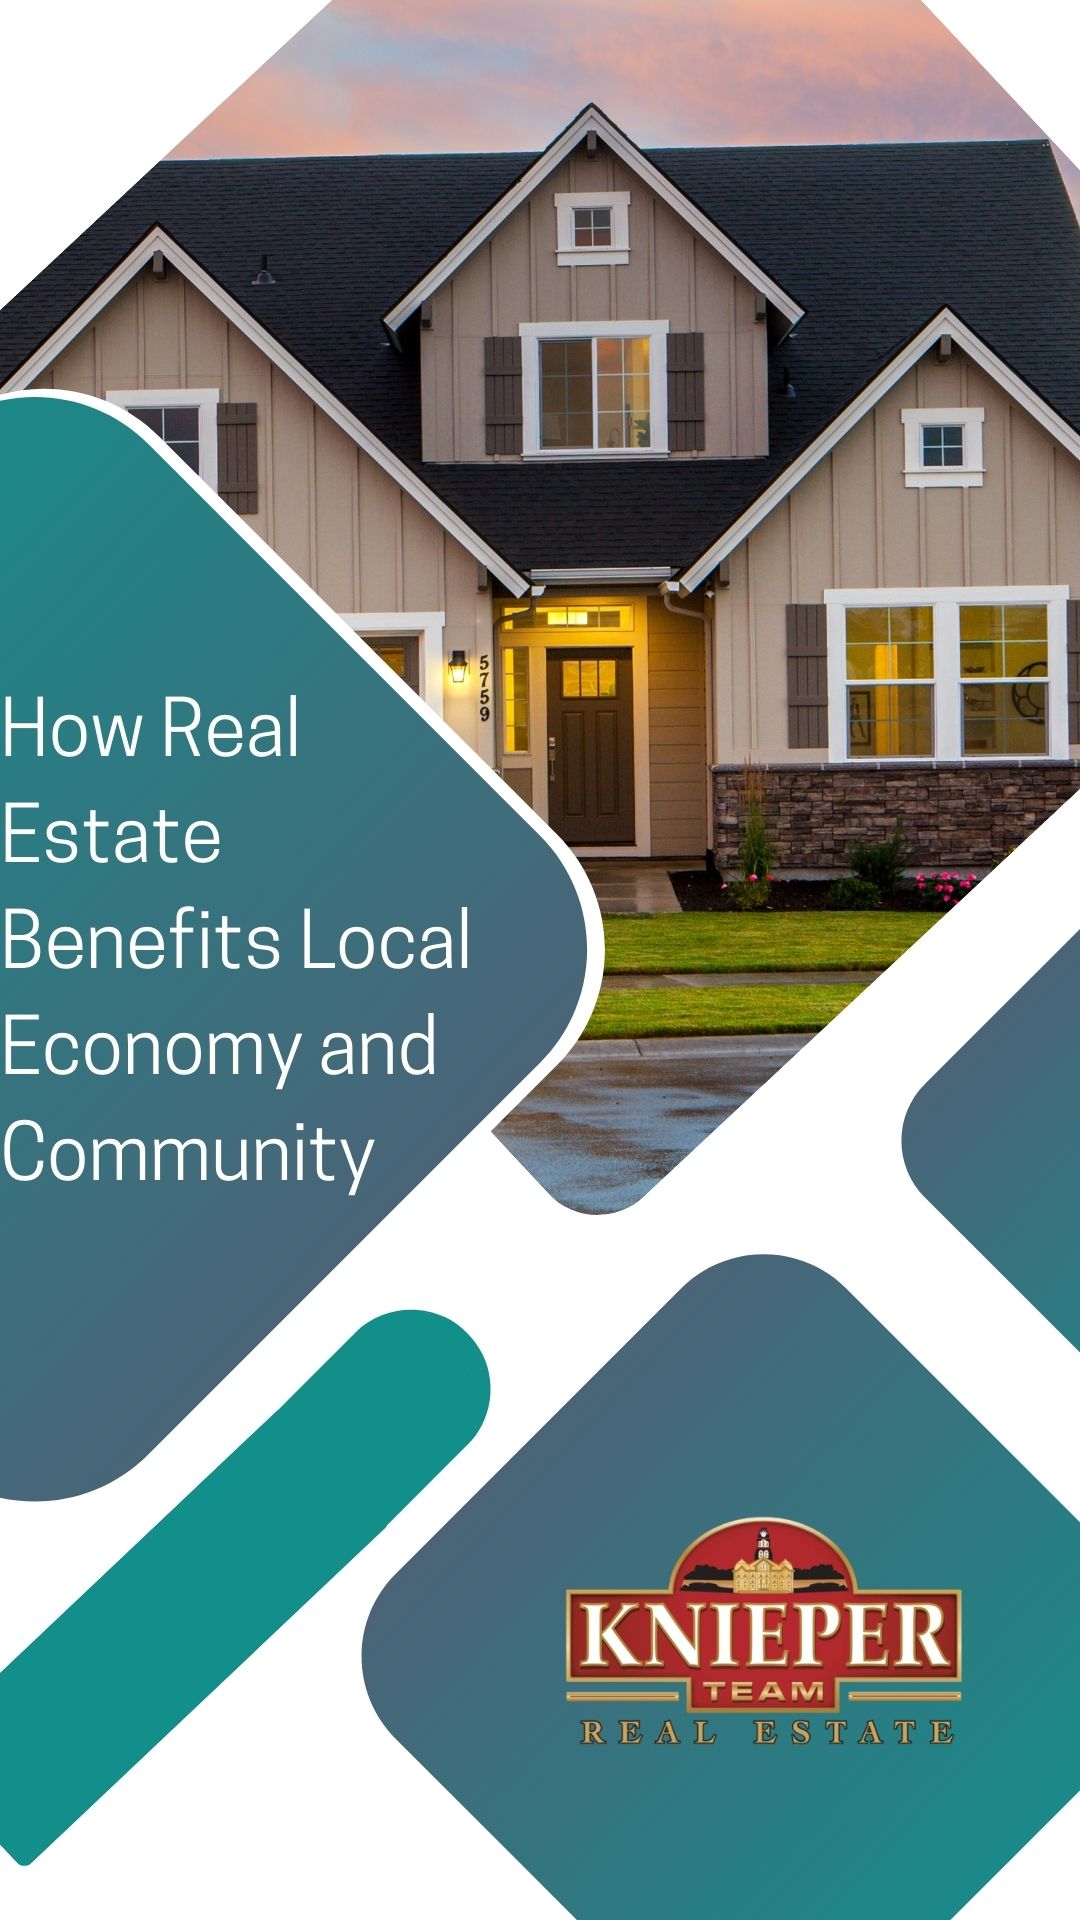 How Real Estate Benefits Local Economy and Community